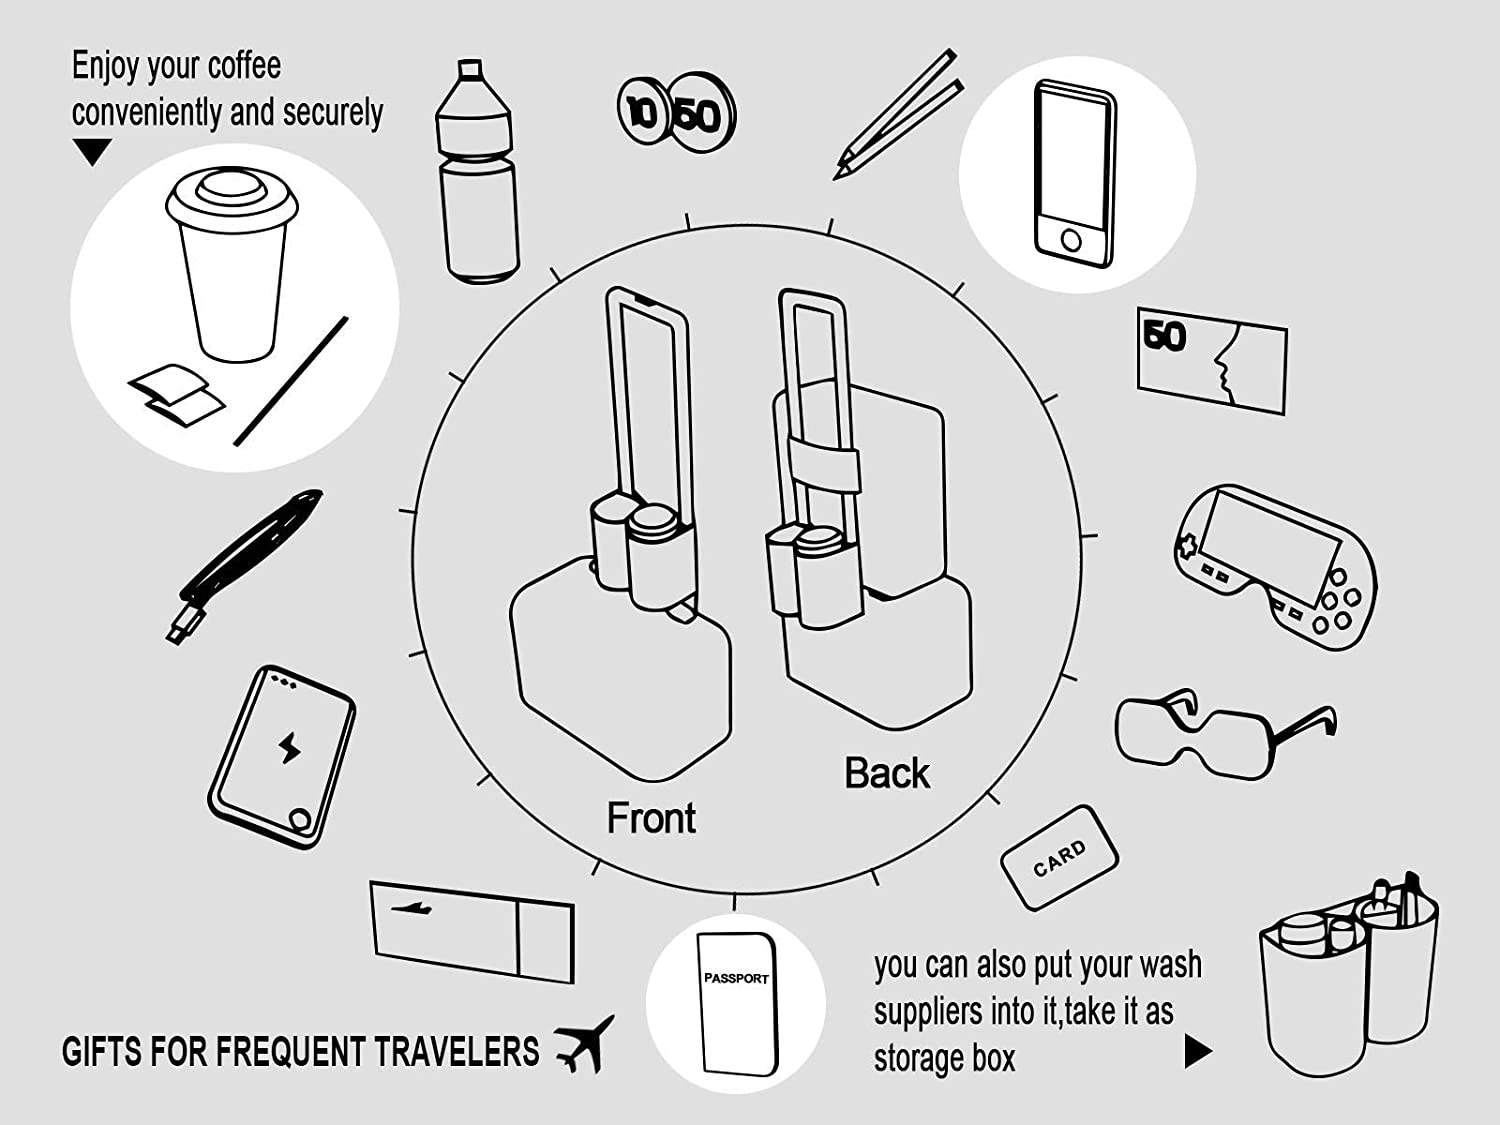 Factory Oem Odm Luggage Travel Drink Bag Cup Holder Fits All Suitcase Handles Free Hand Drink Beverages Caddy